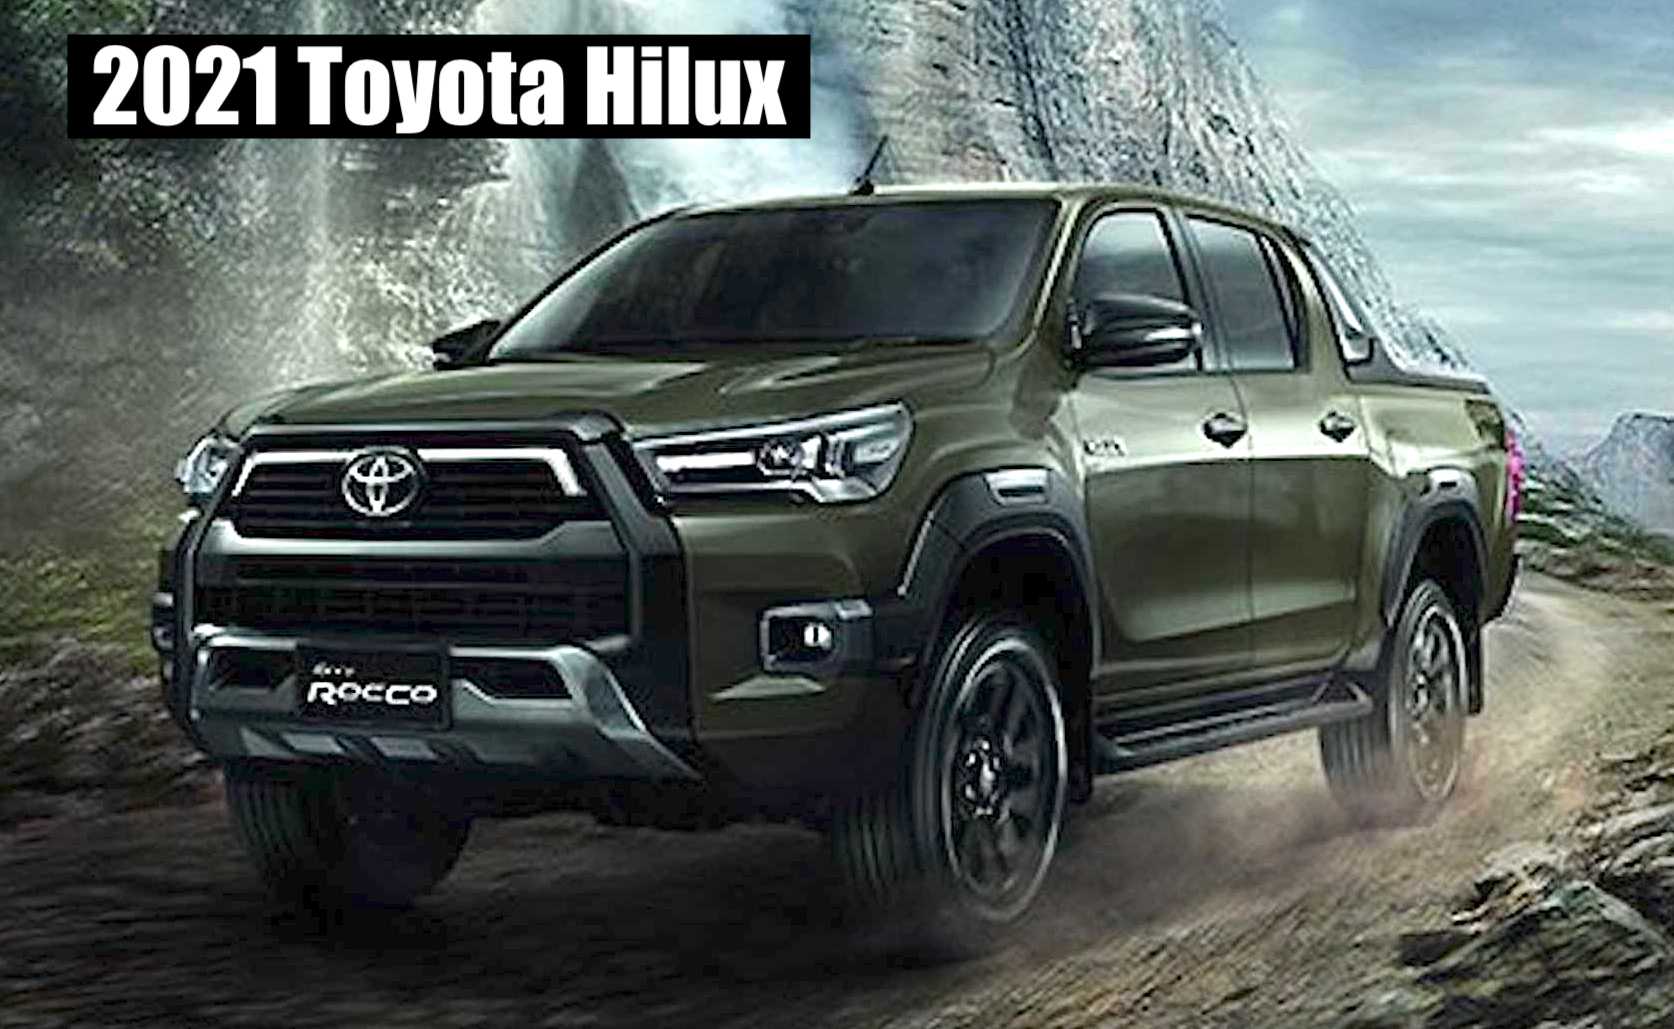 Refreshed 2021 Toyota Hilux Makes Its World Debut Does It Hint At